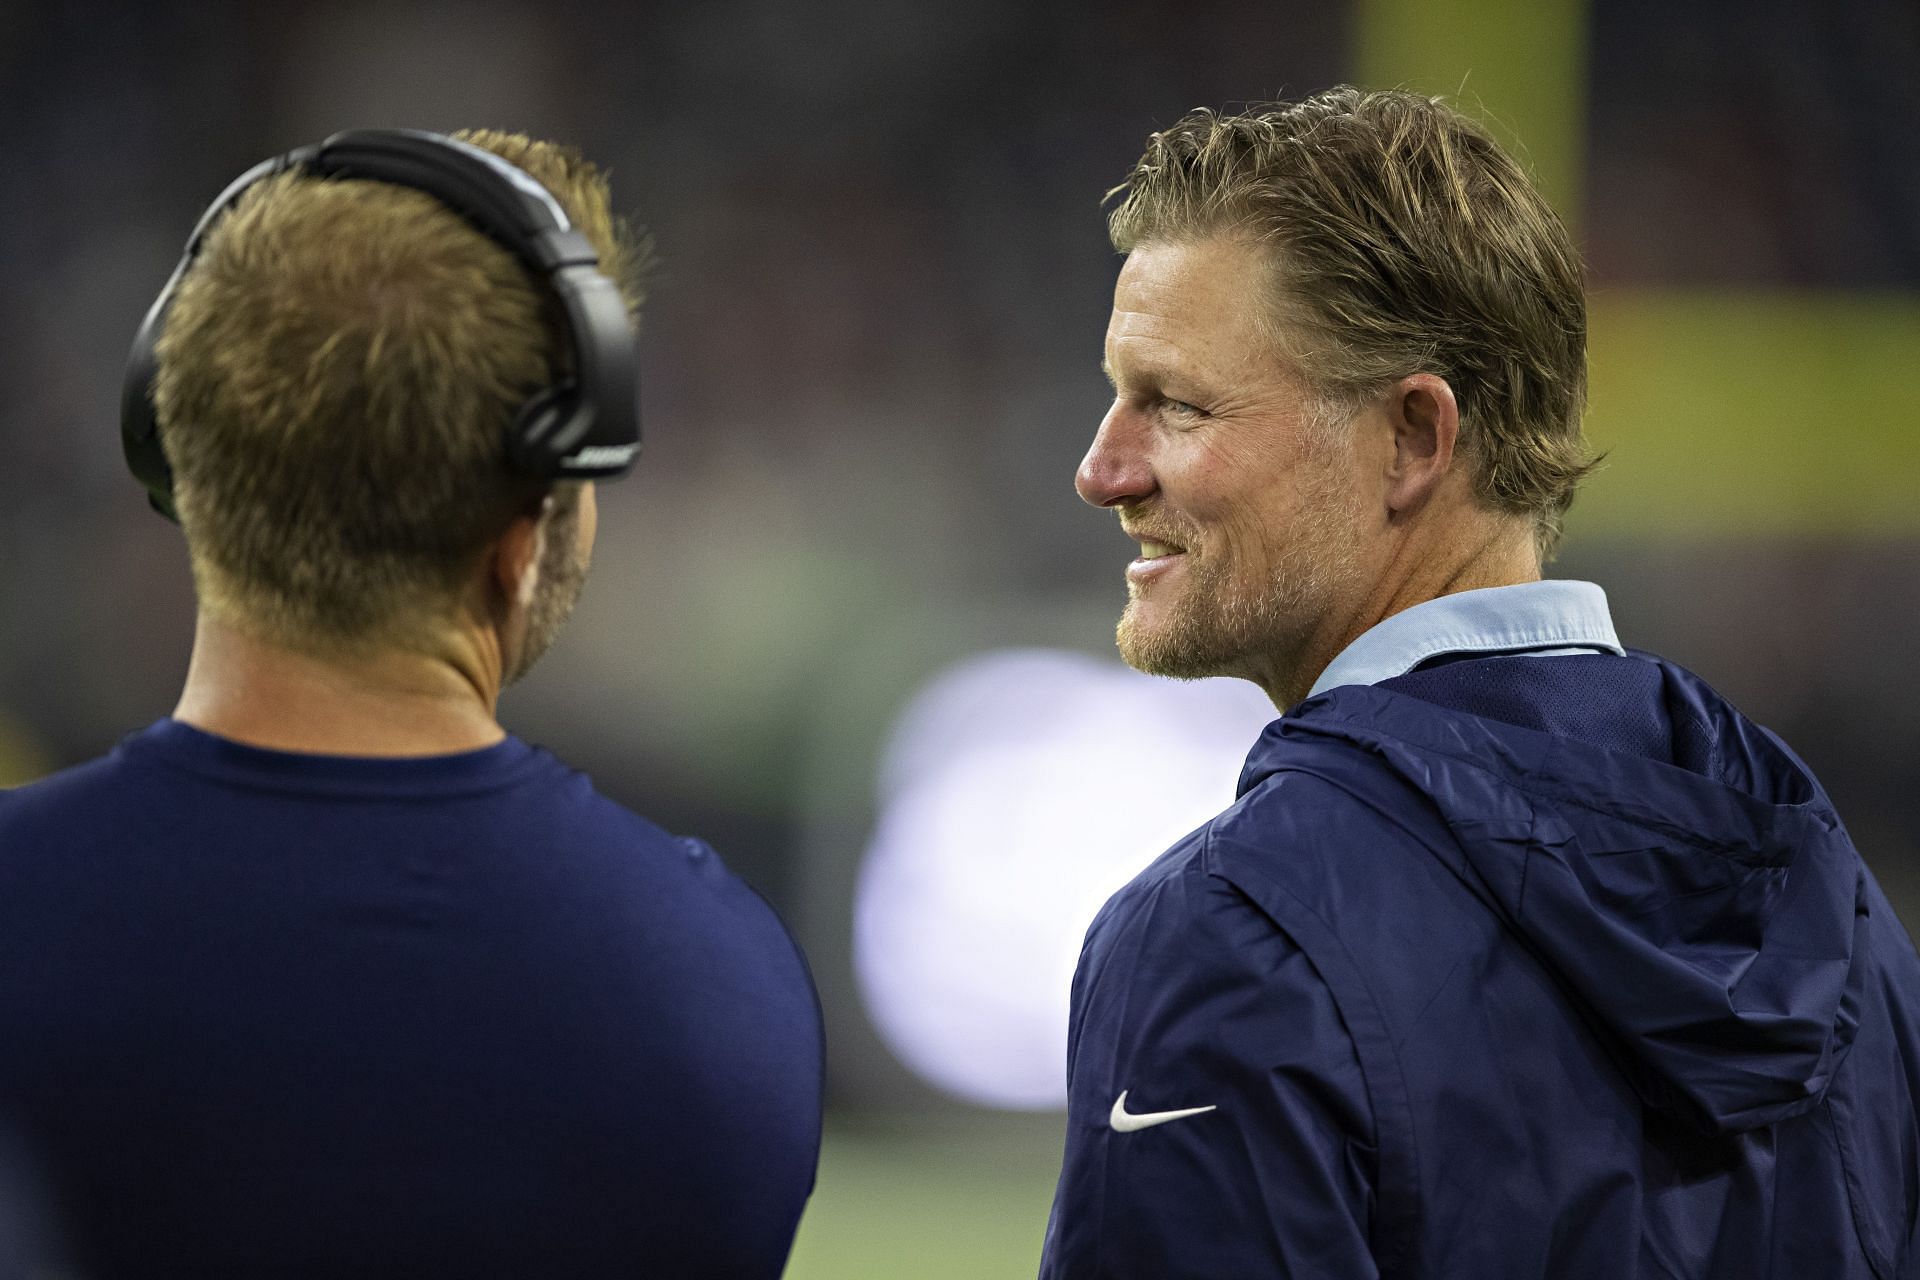 EXCLUSIVE: Rams GM Les Snead tells story behind iconic “F*** them